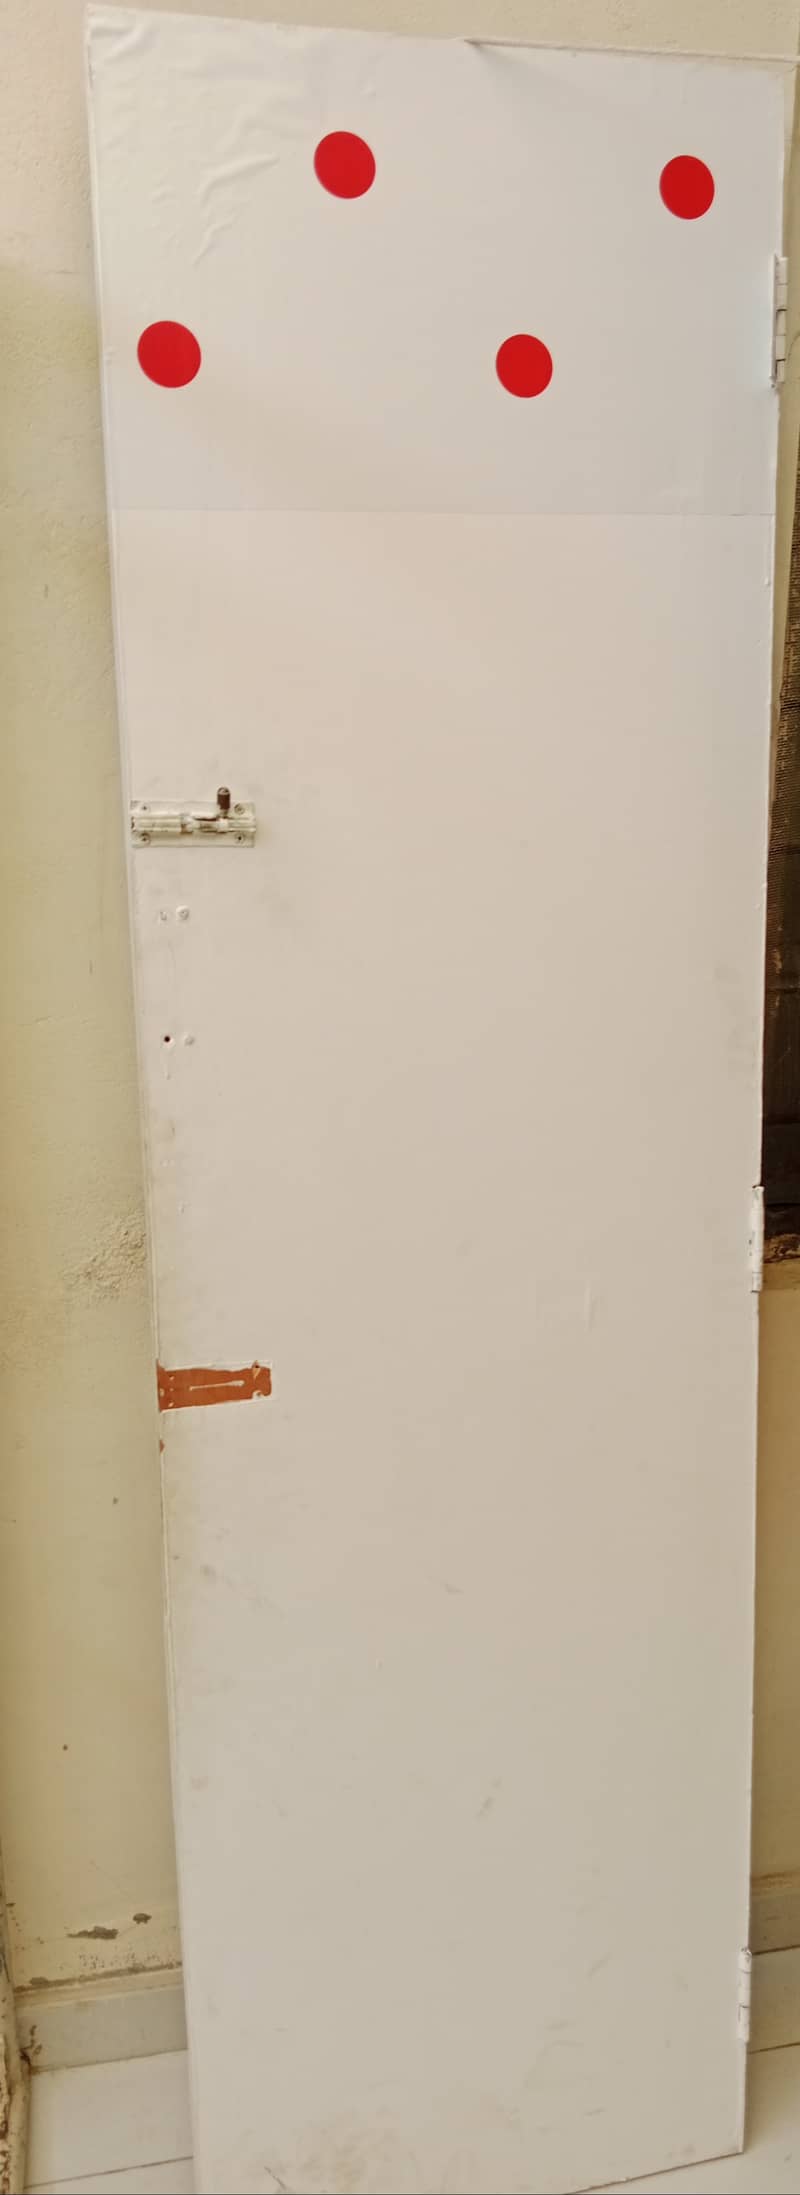 Door for sale neat and clean only WhatsUp 03060103003 3